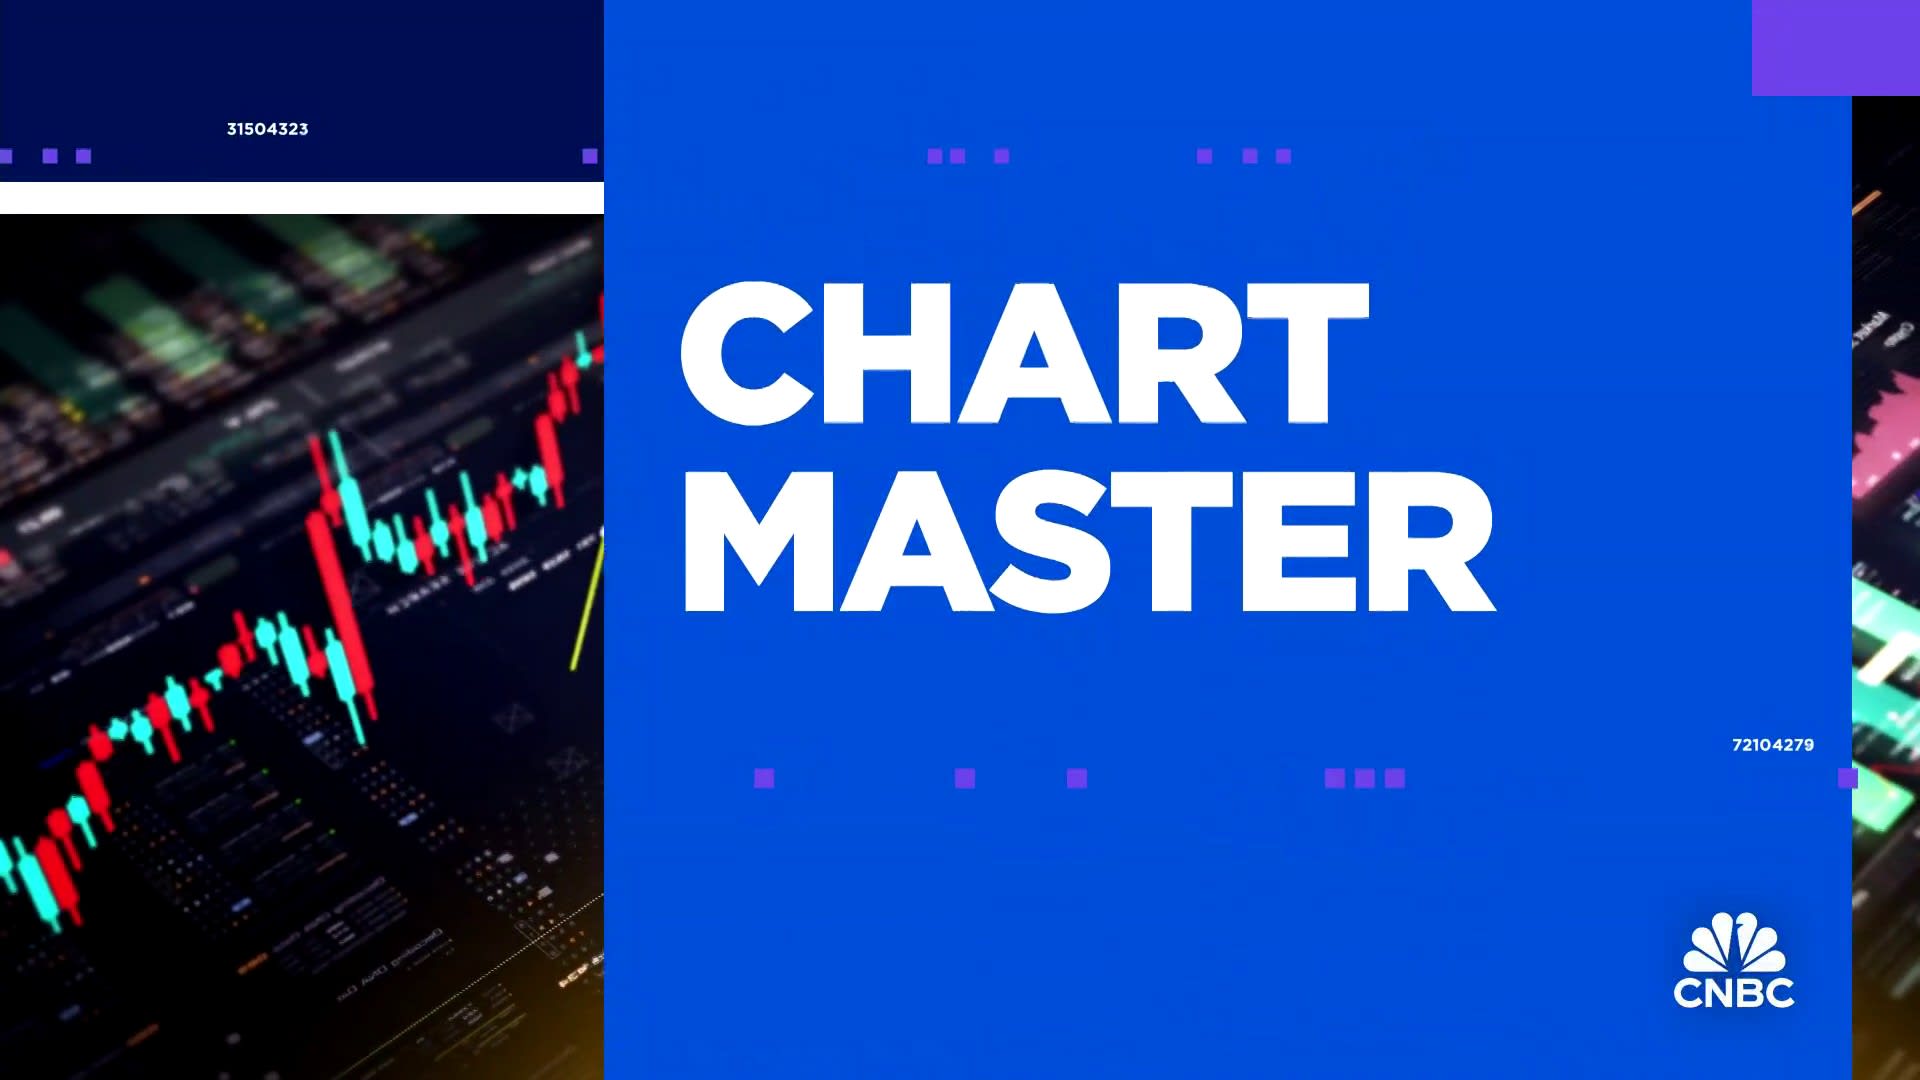 Chart Master: Getting a technical look at Charles Schwab and American Express - CNBC